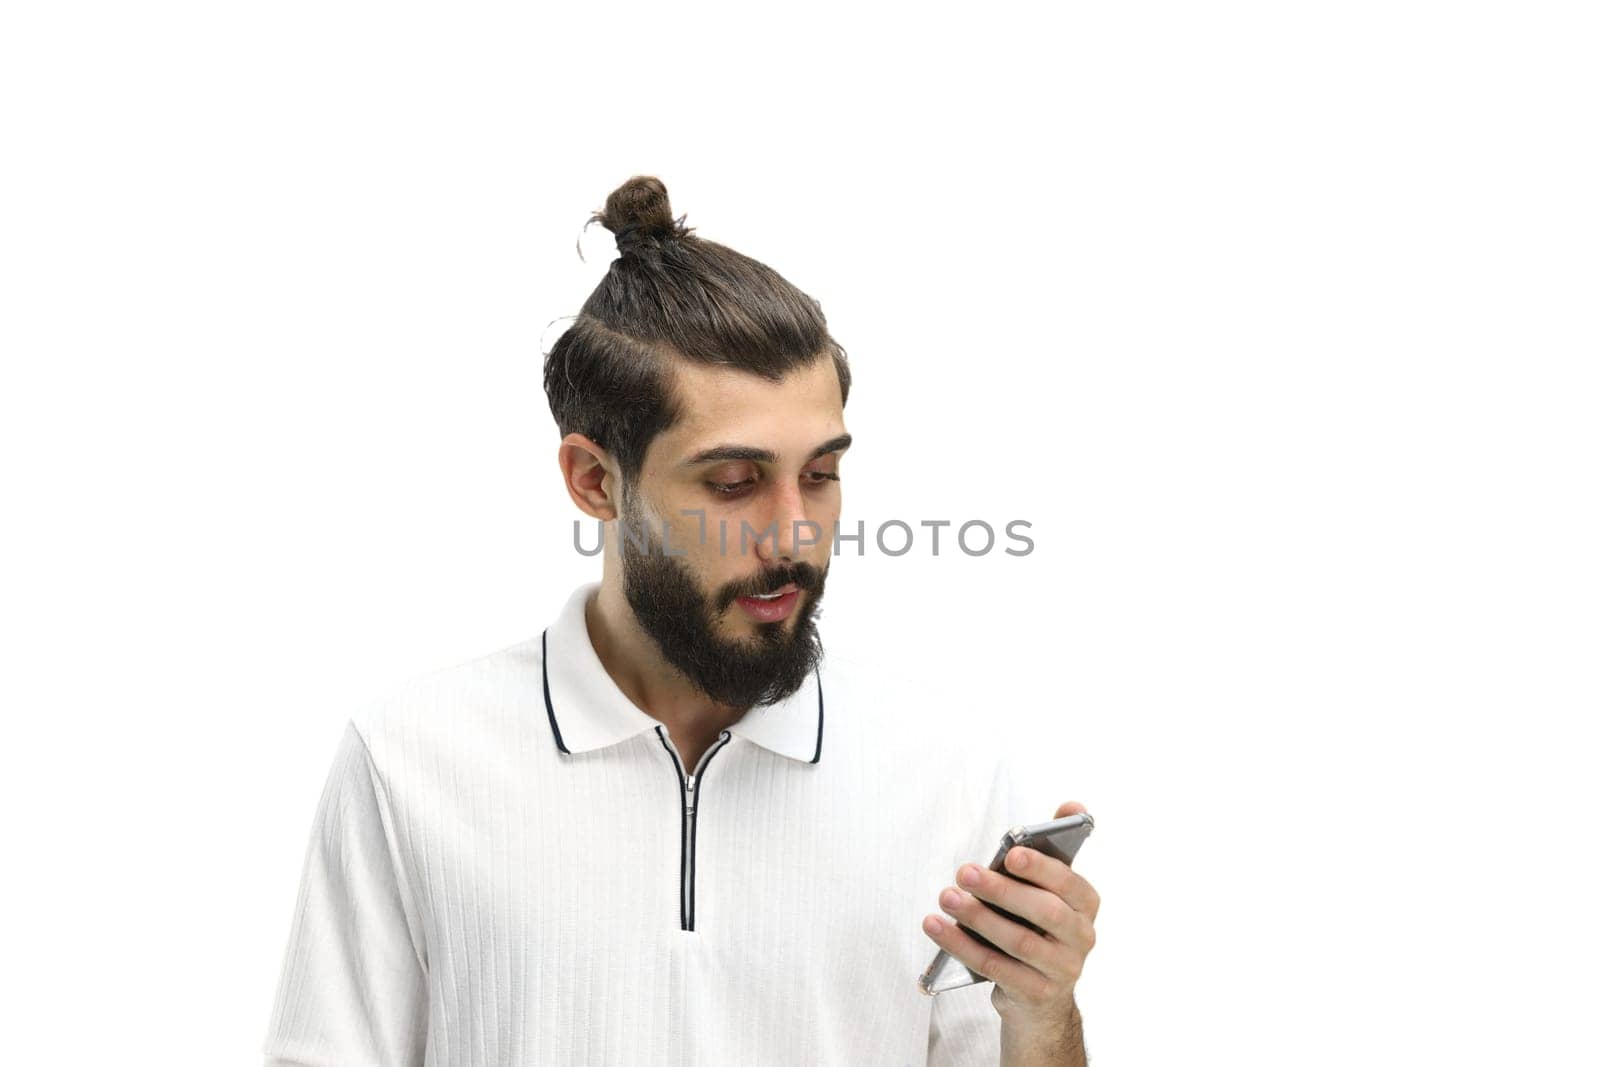 Man, close-up, on a white background, with a phone.